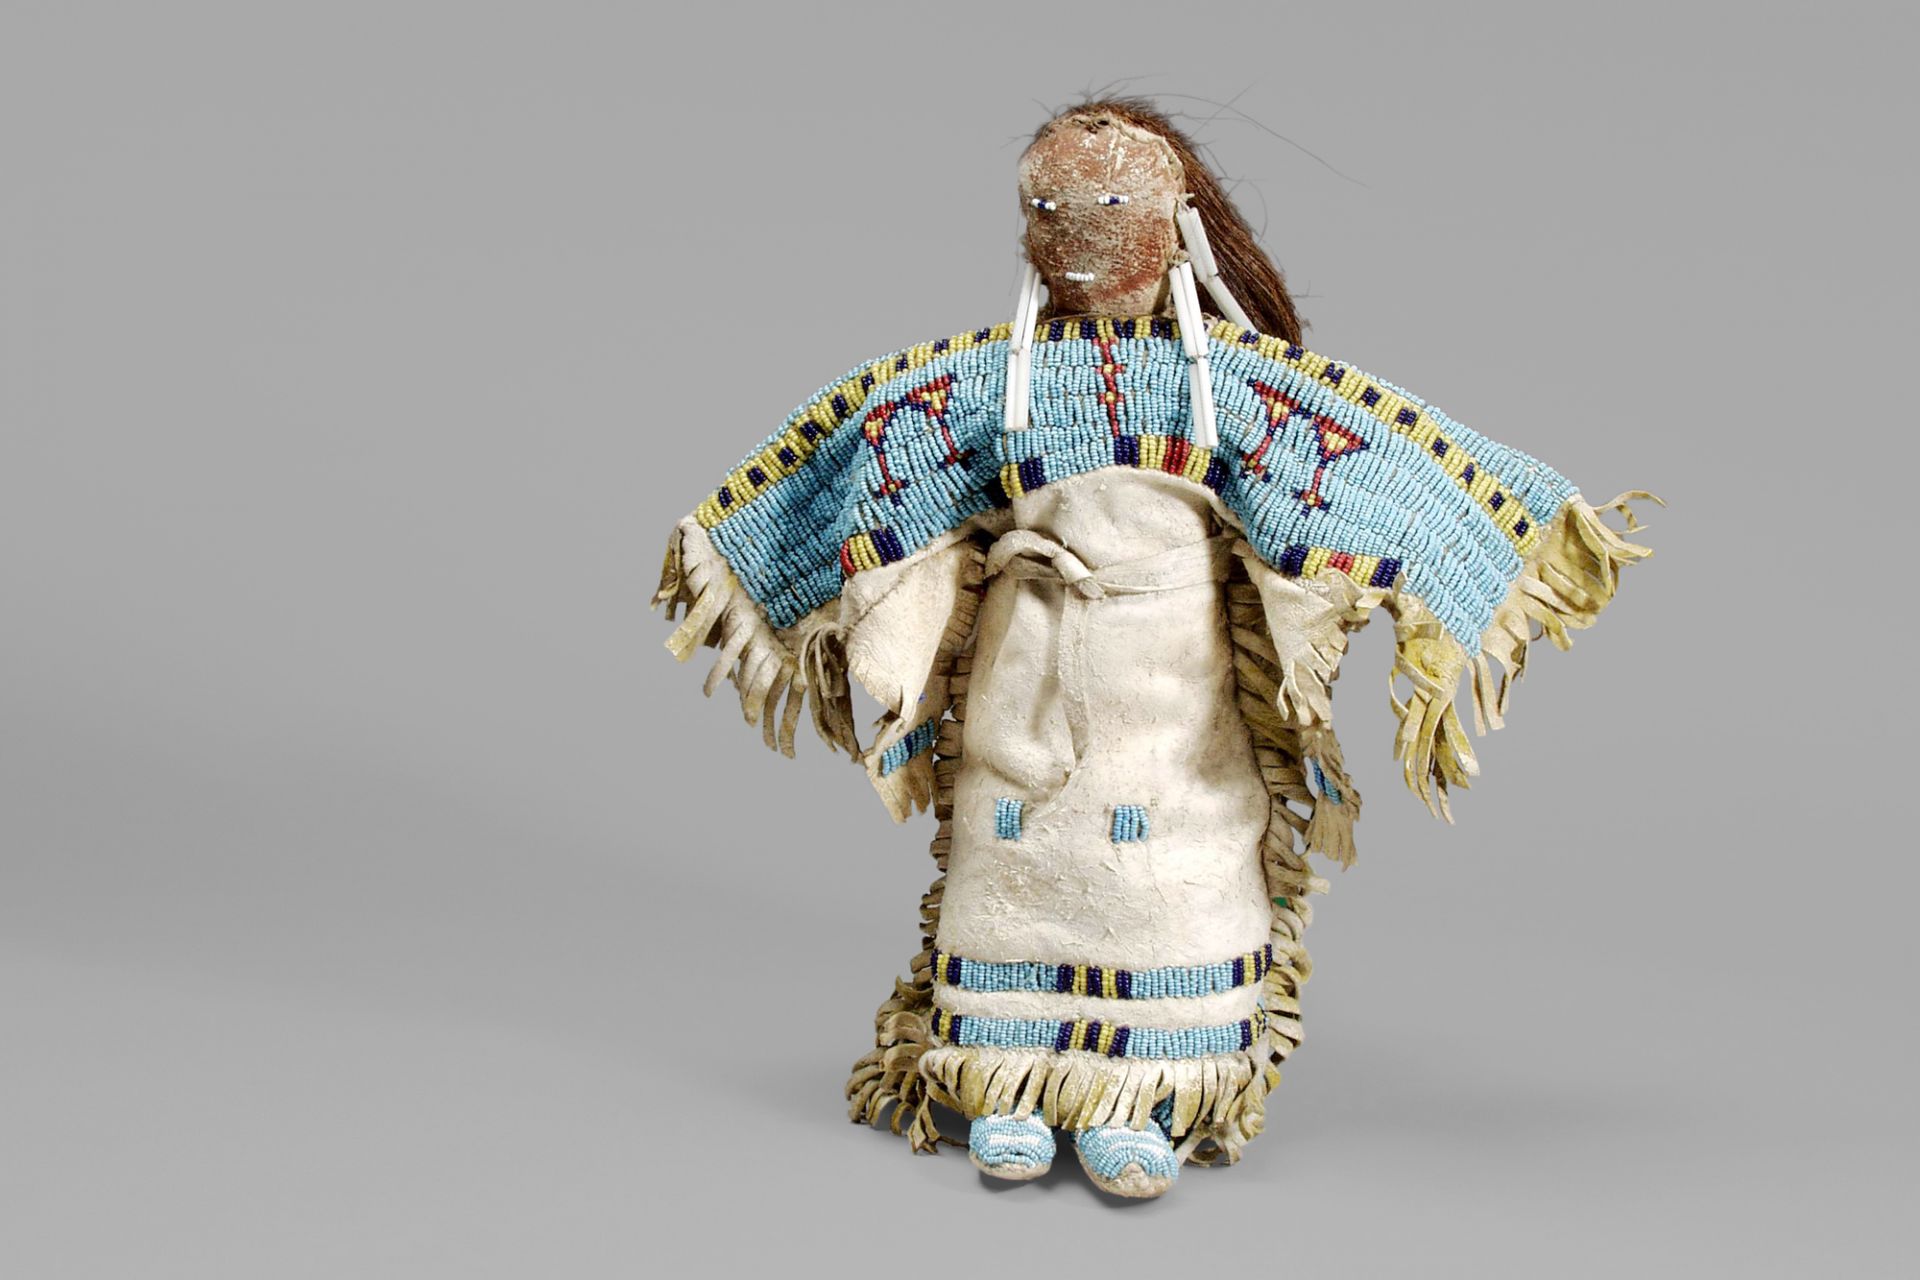 Doll, North America, approx. 1870